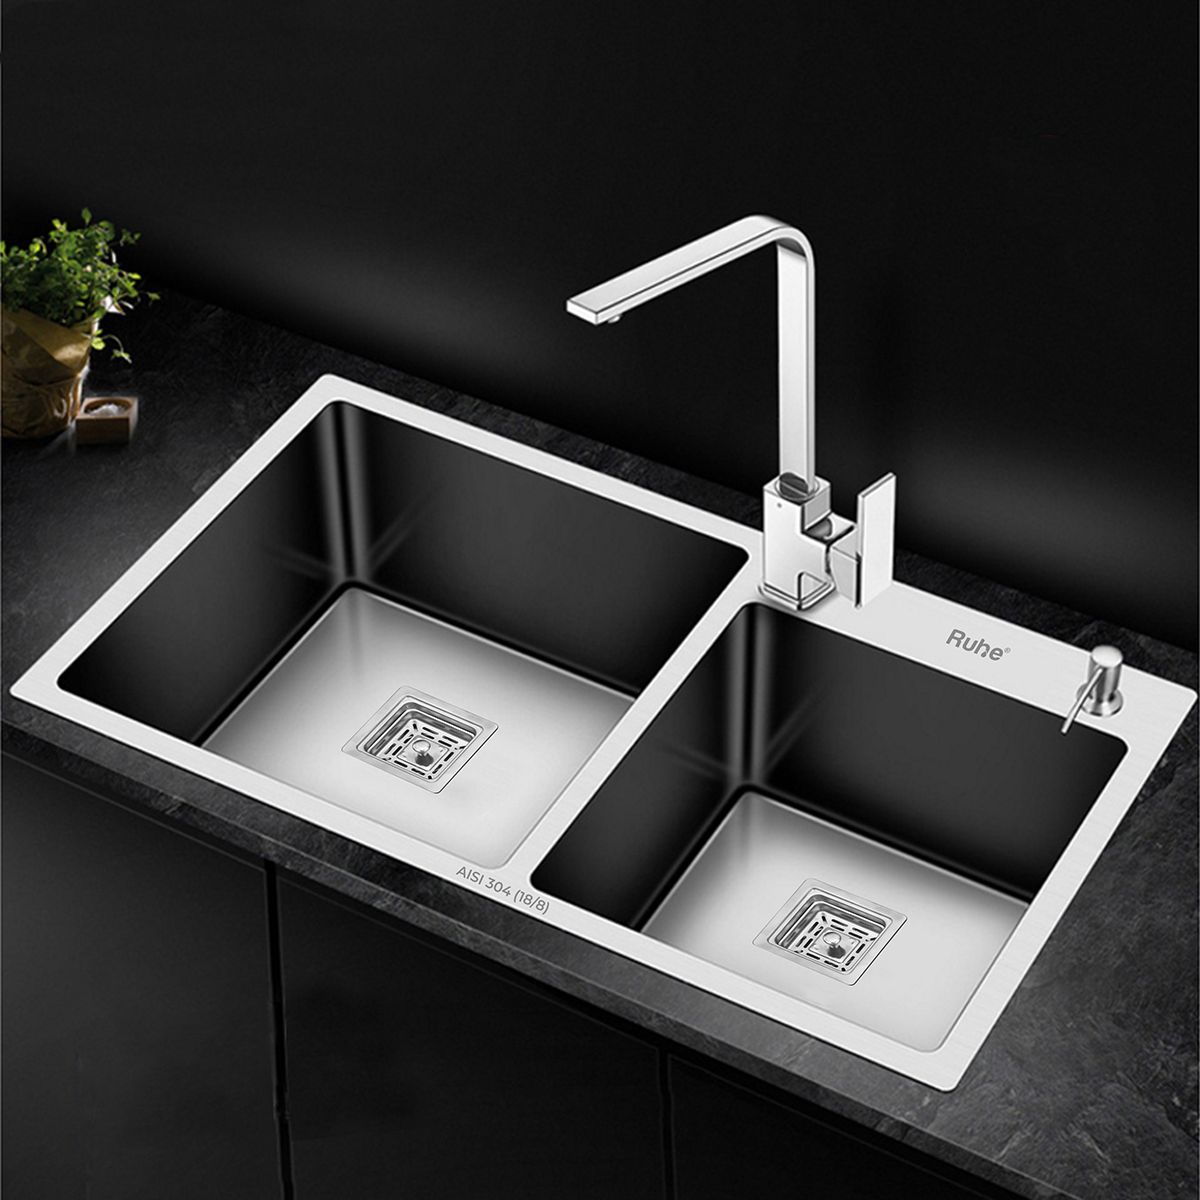 Handmade Double Bowl 304-Grade Kitchen Sink (37 x 18 x 10 Inches) with Tap Hole installed